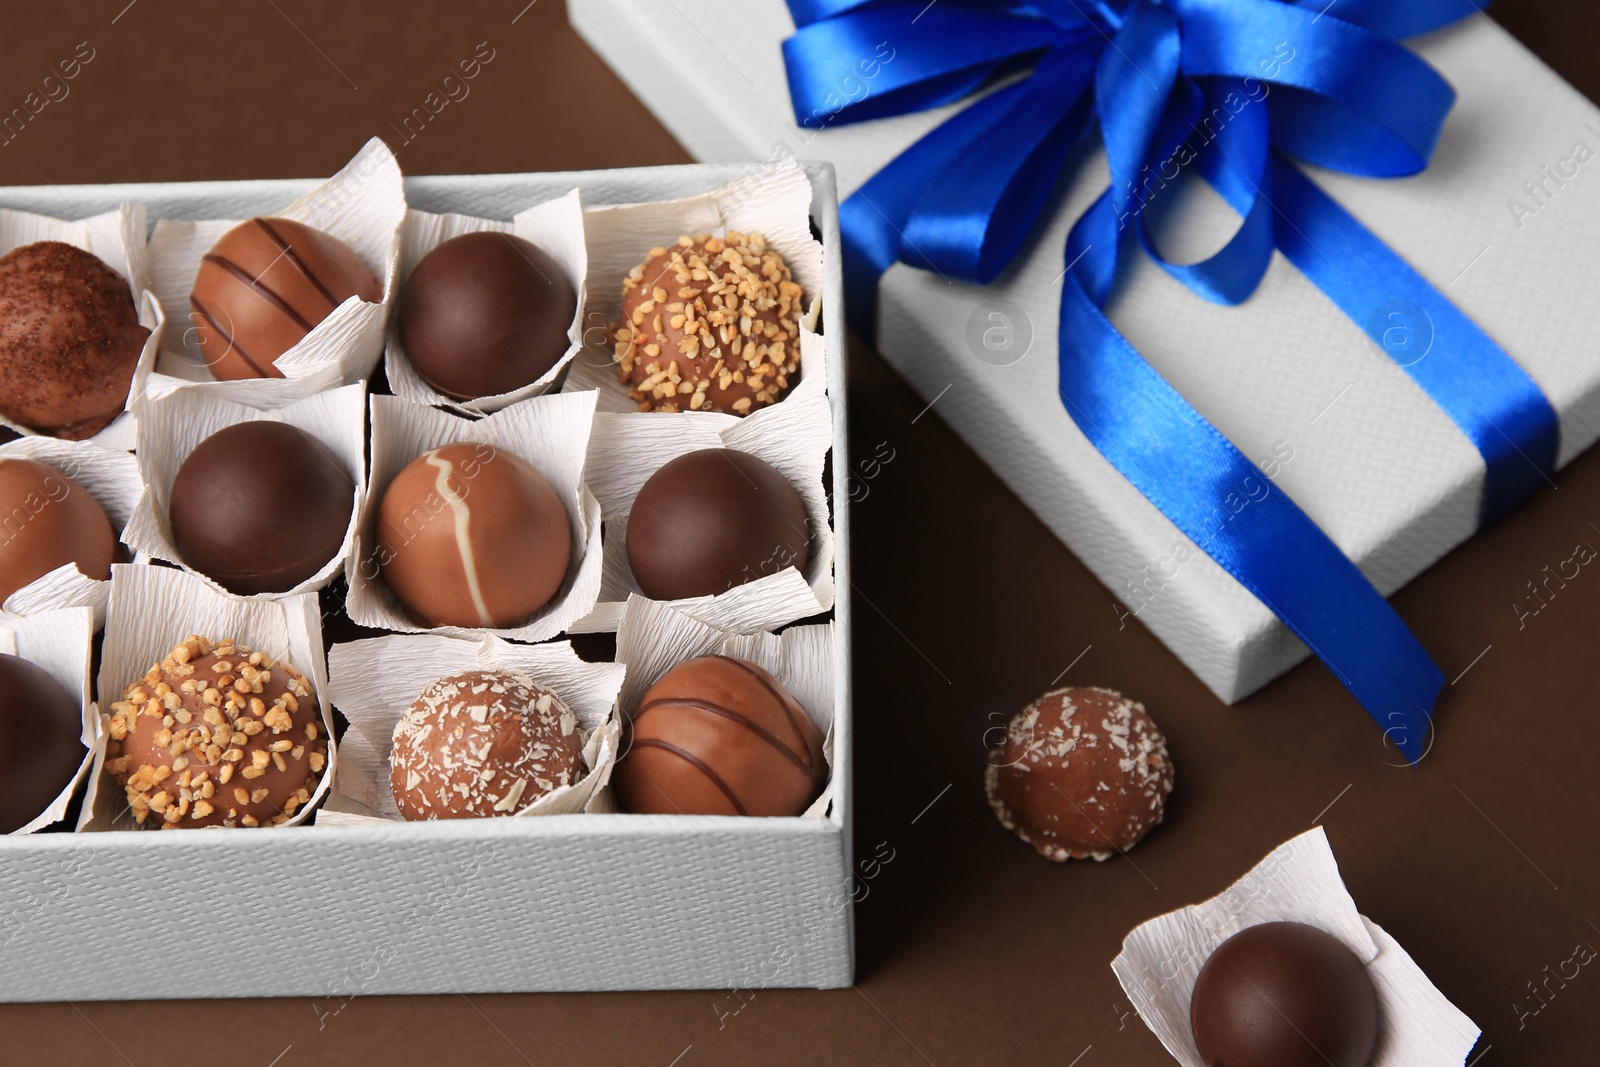 Photo of Box with delicious chocolate candies on brown background, closeup